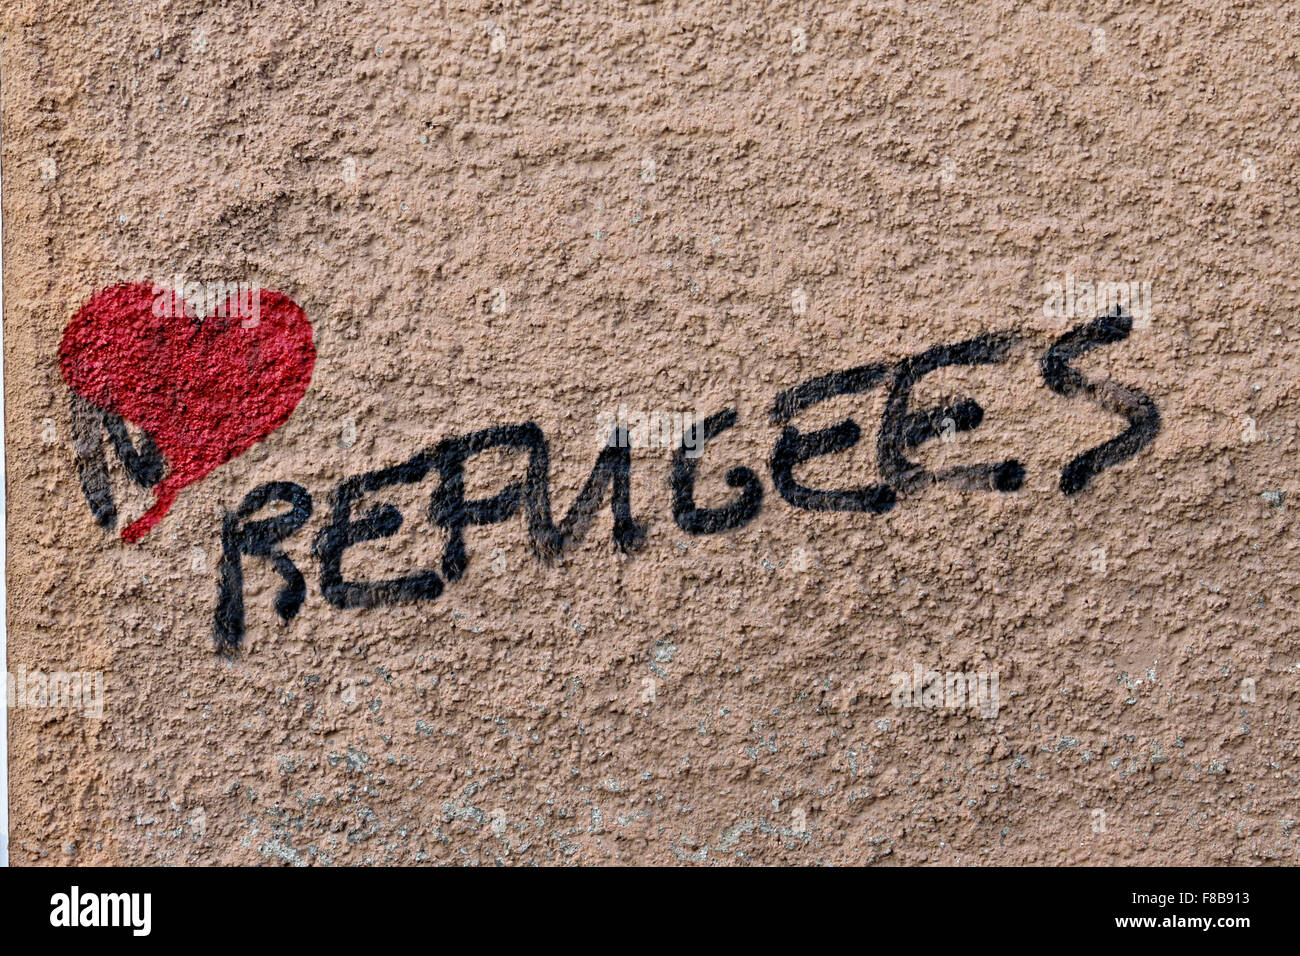 Refugees graffiti with red love heart on pink wall Stock Photo